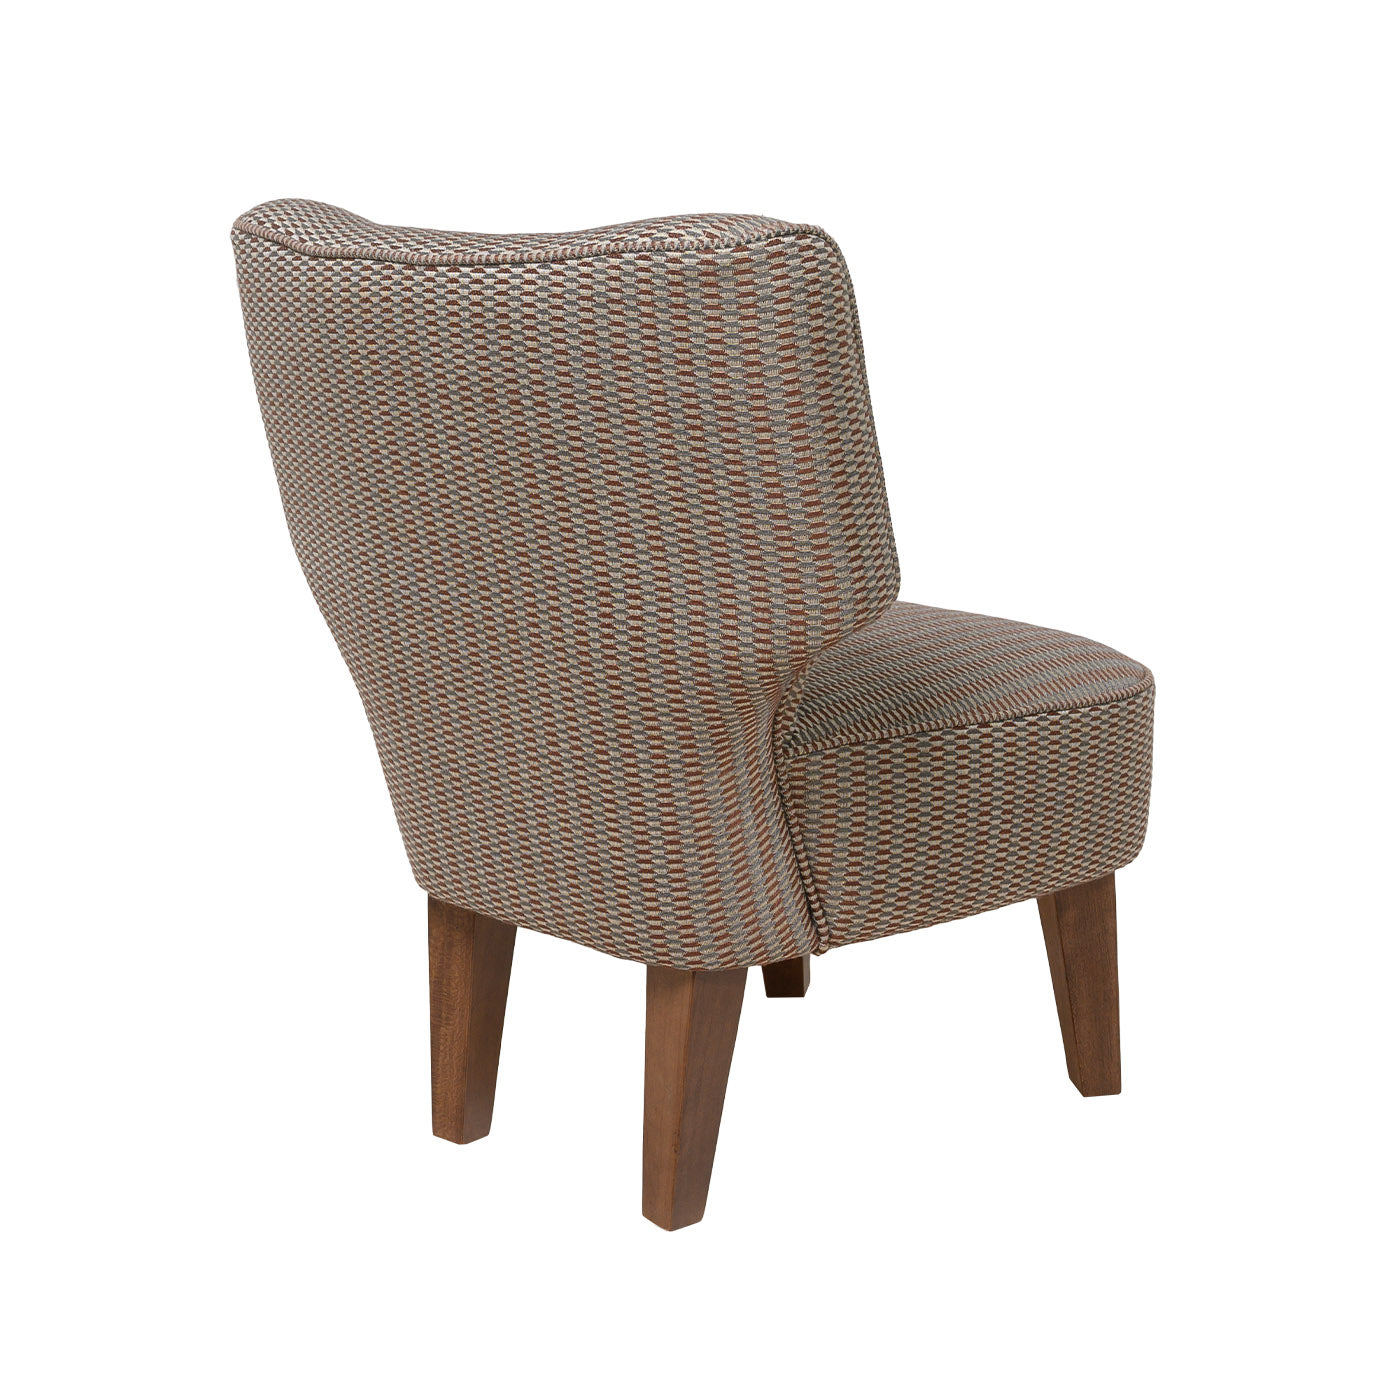 Mimosa Geometric-Patterned Chair - Alternative view 3